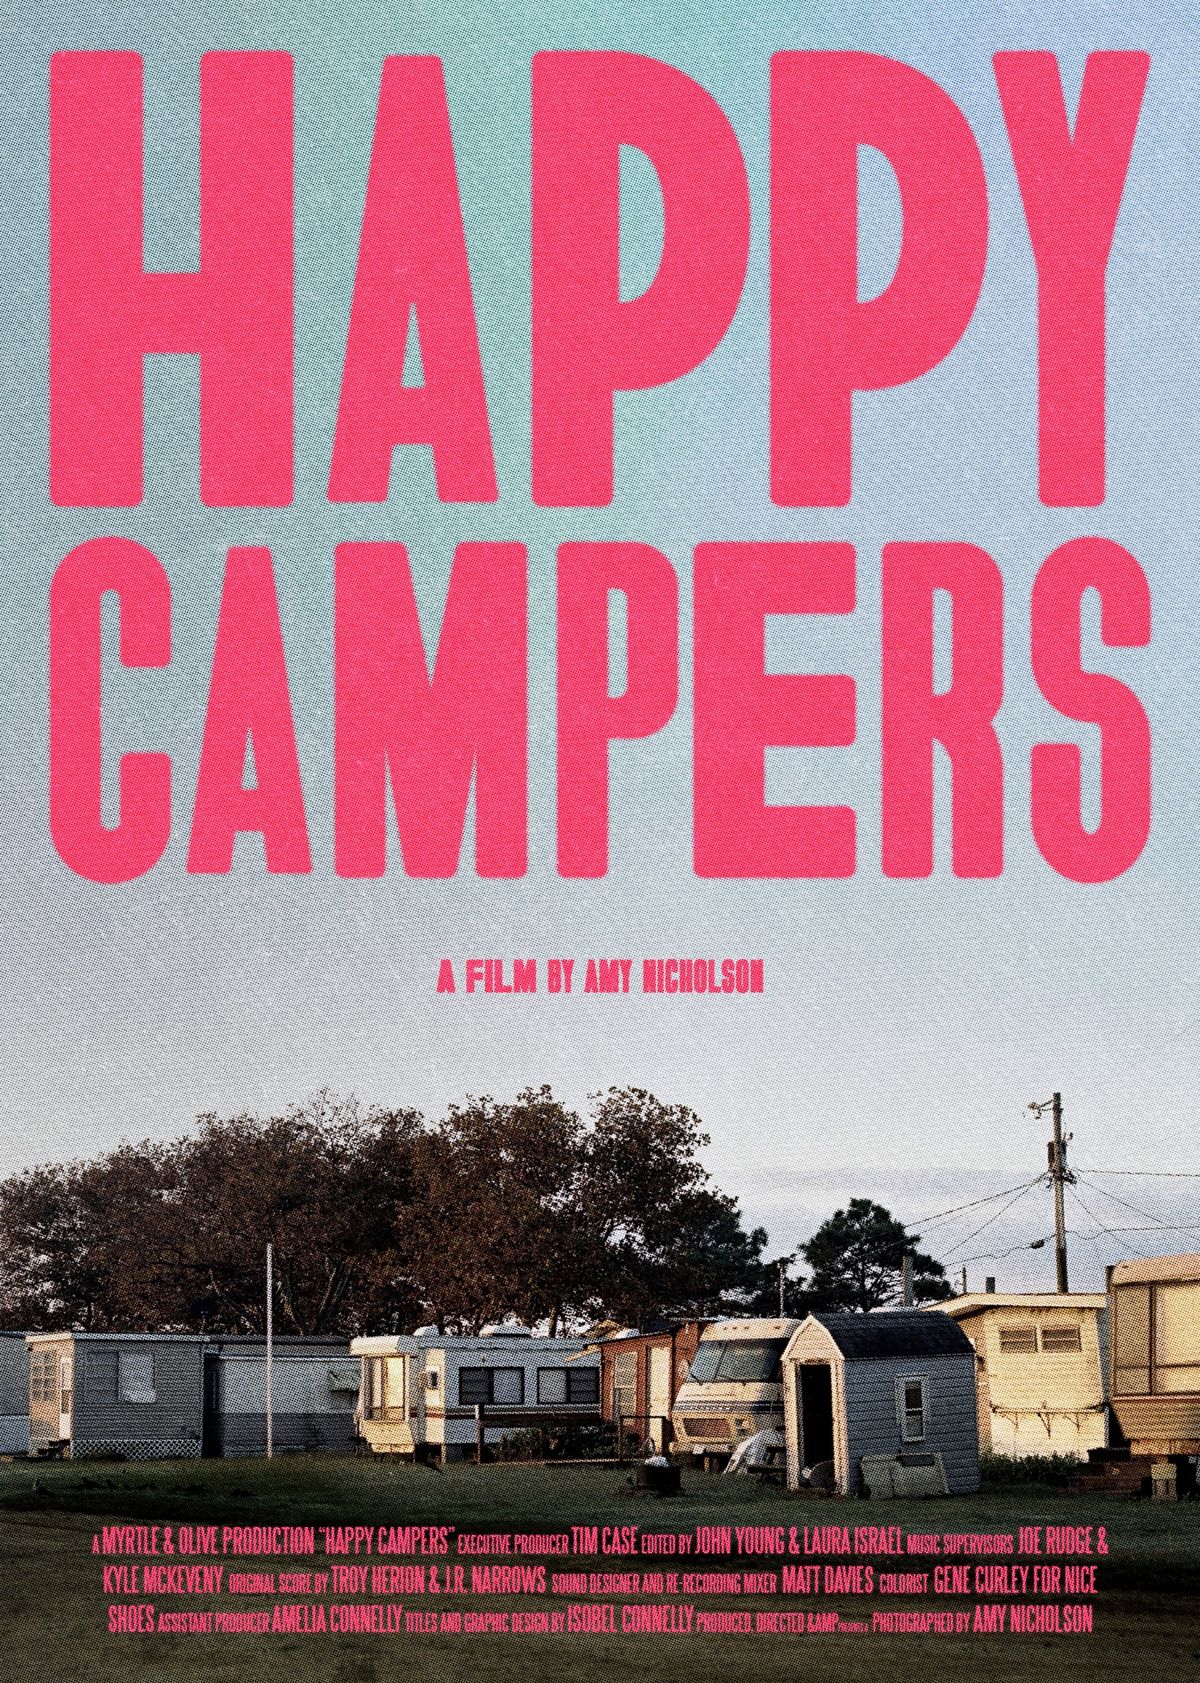 Filmmaker AMY NICHOLSON, In-Person, presenting "HAPPY CAMPERS"at the Midtown Cinema, 7:30PM May 17th